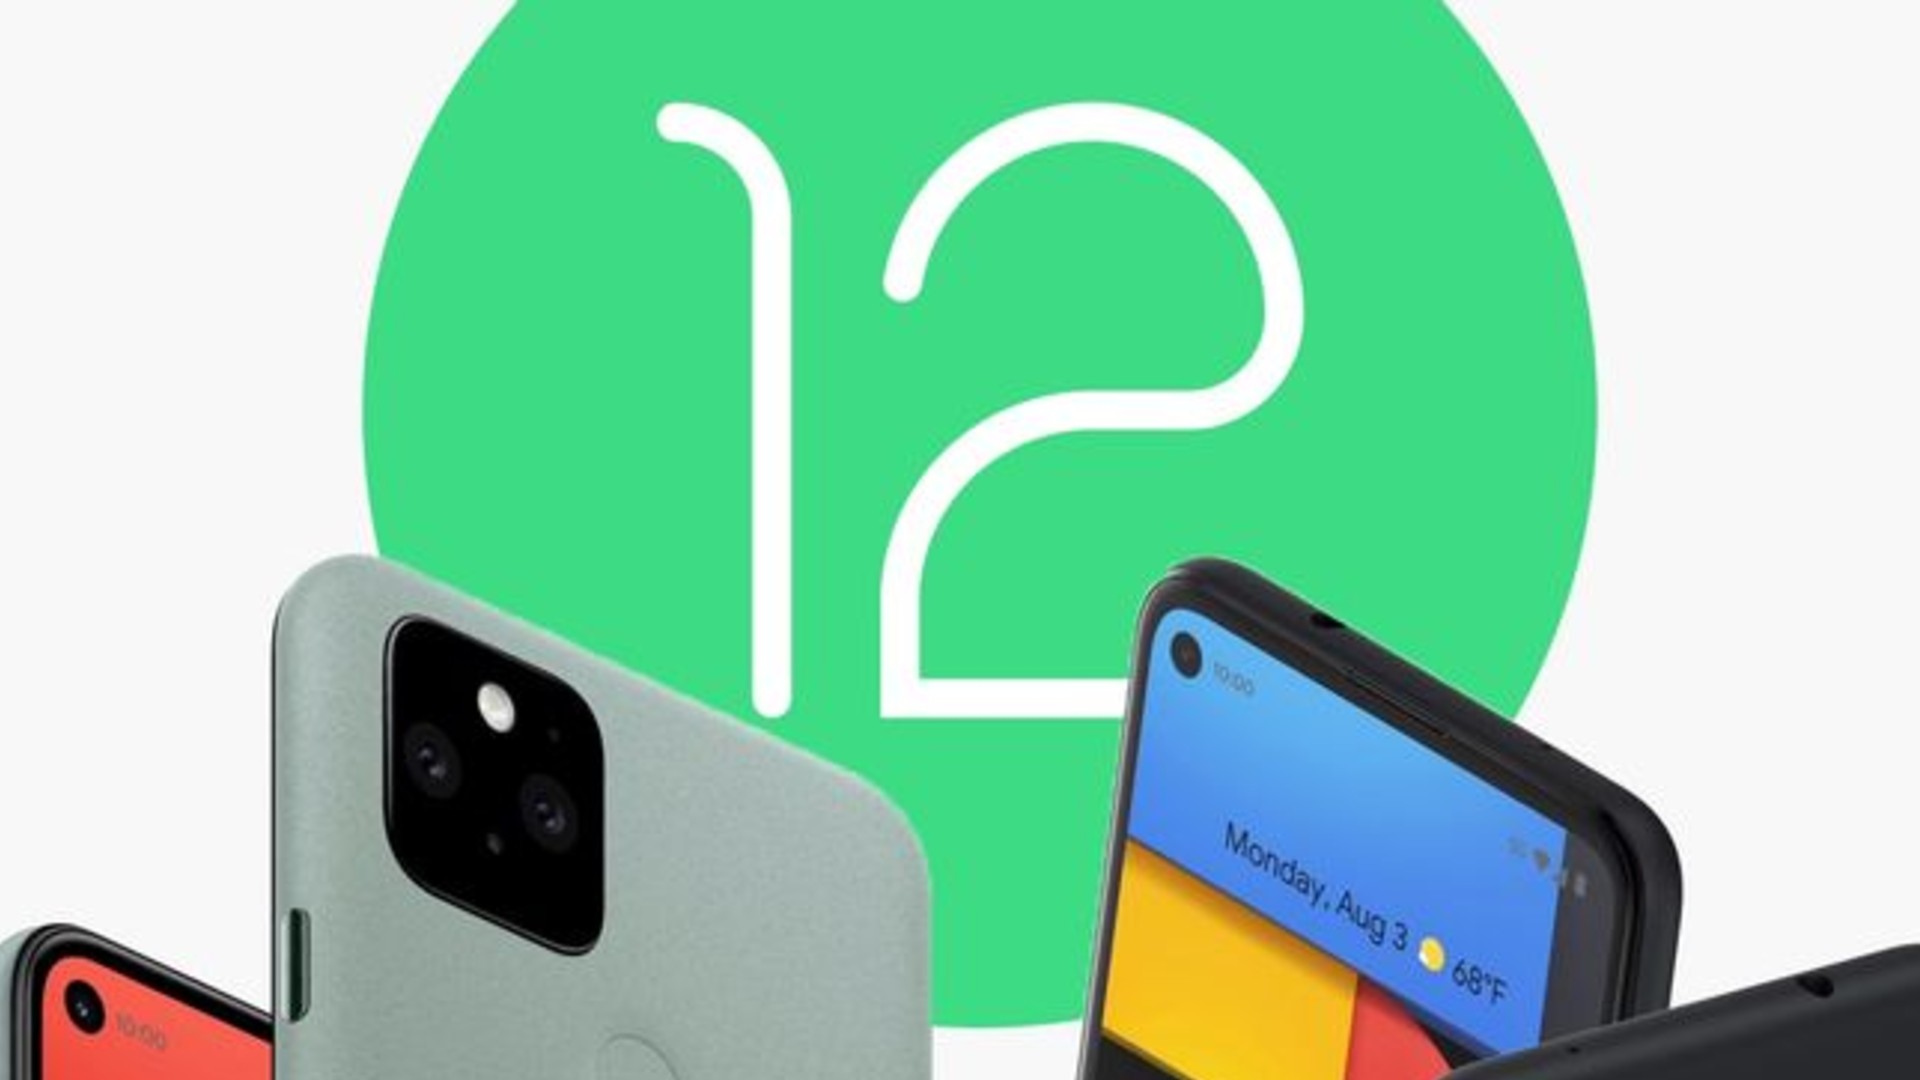 10 Major Changes With Android 12: Top Android 12 Features Leaked